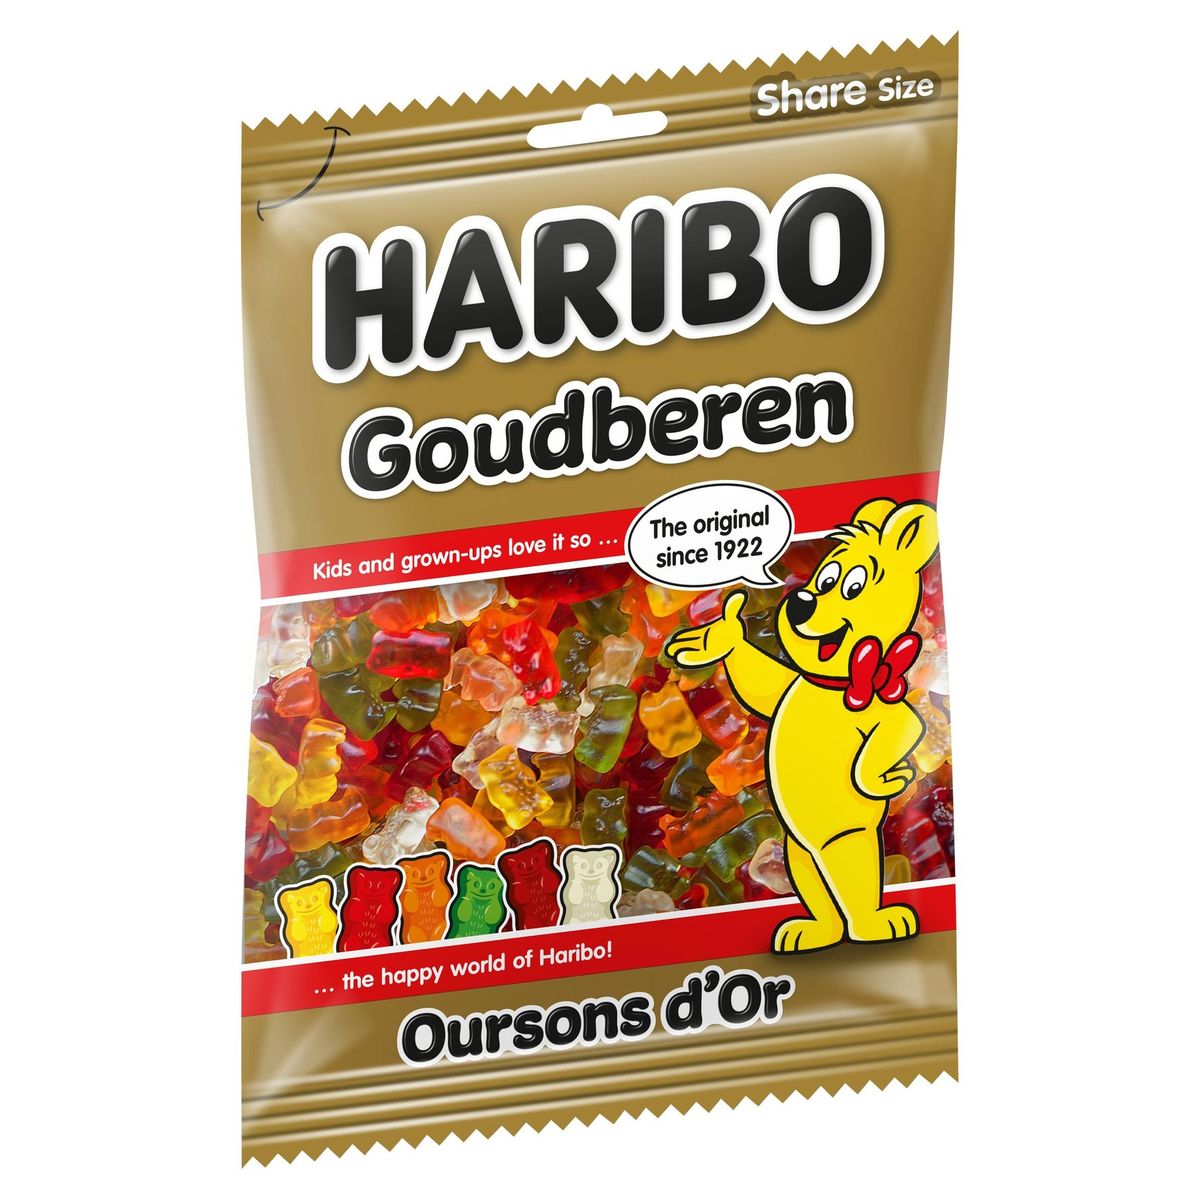 Haribo Oursons d'Or Share Size 250 g